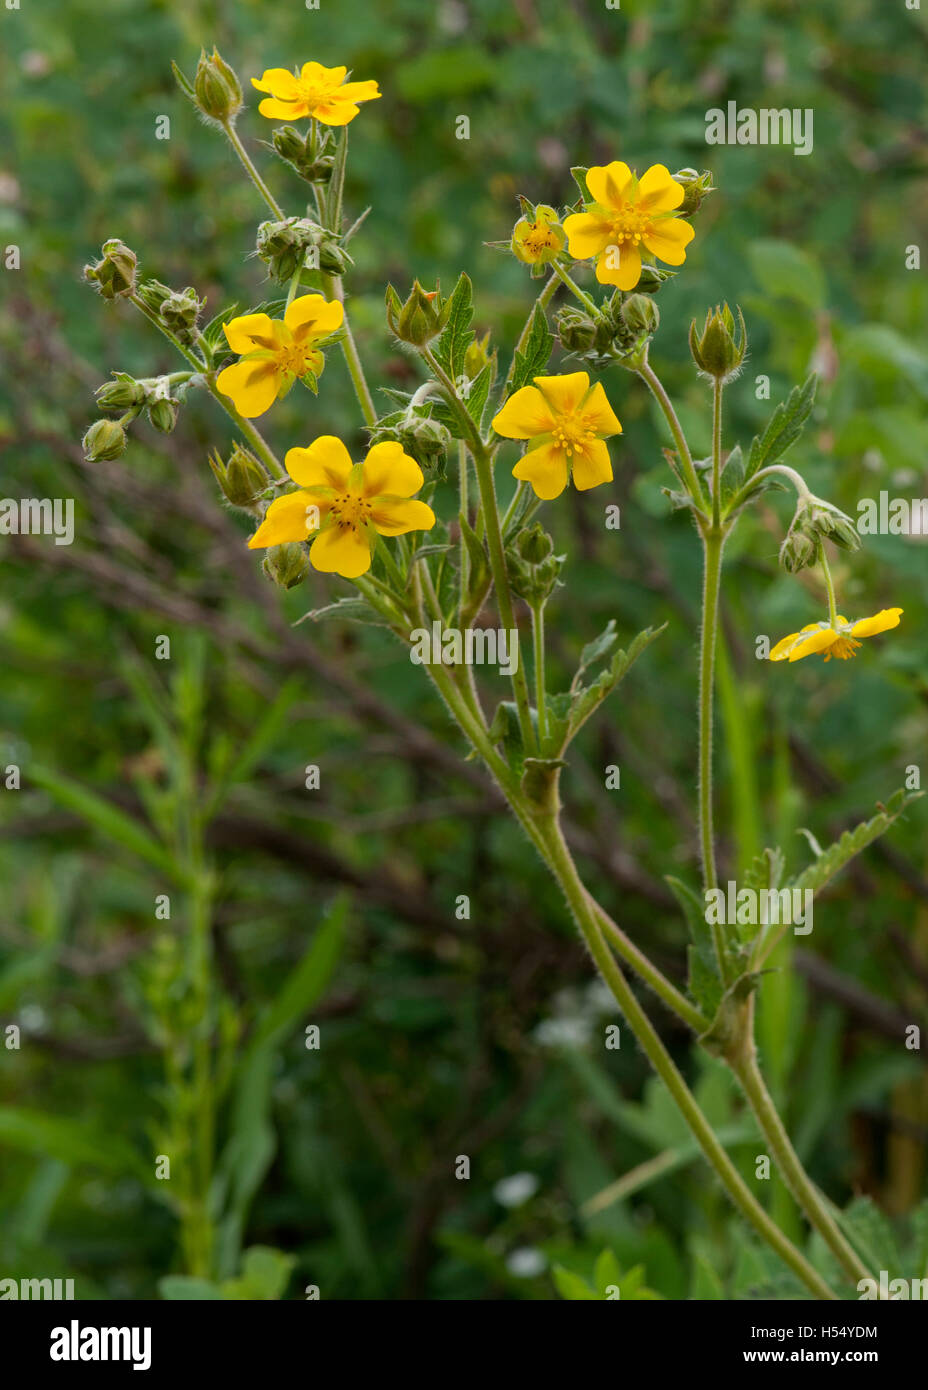 Identification is not certain, but this appears to be a Slender Cinquefoil (Potentilla gracilis) Stock Photo